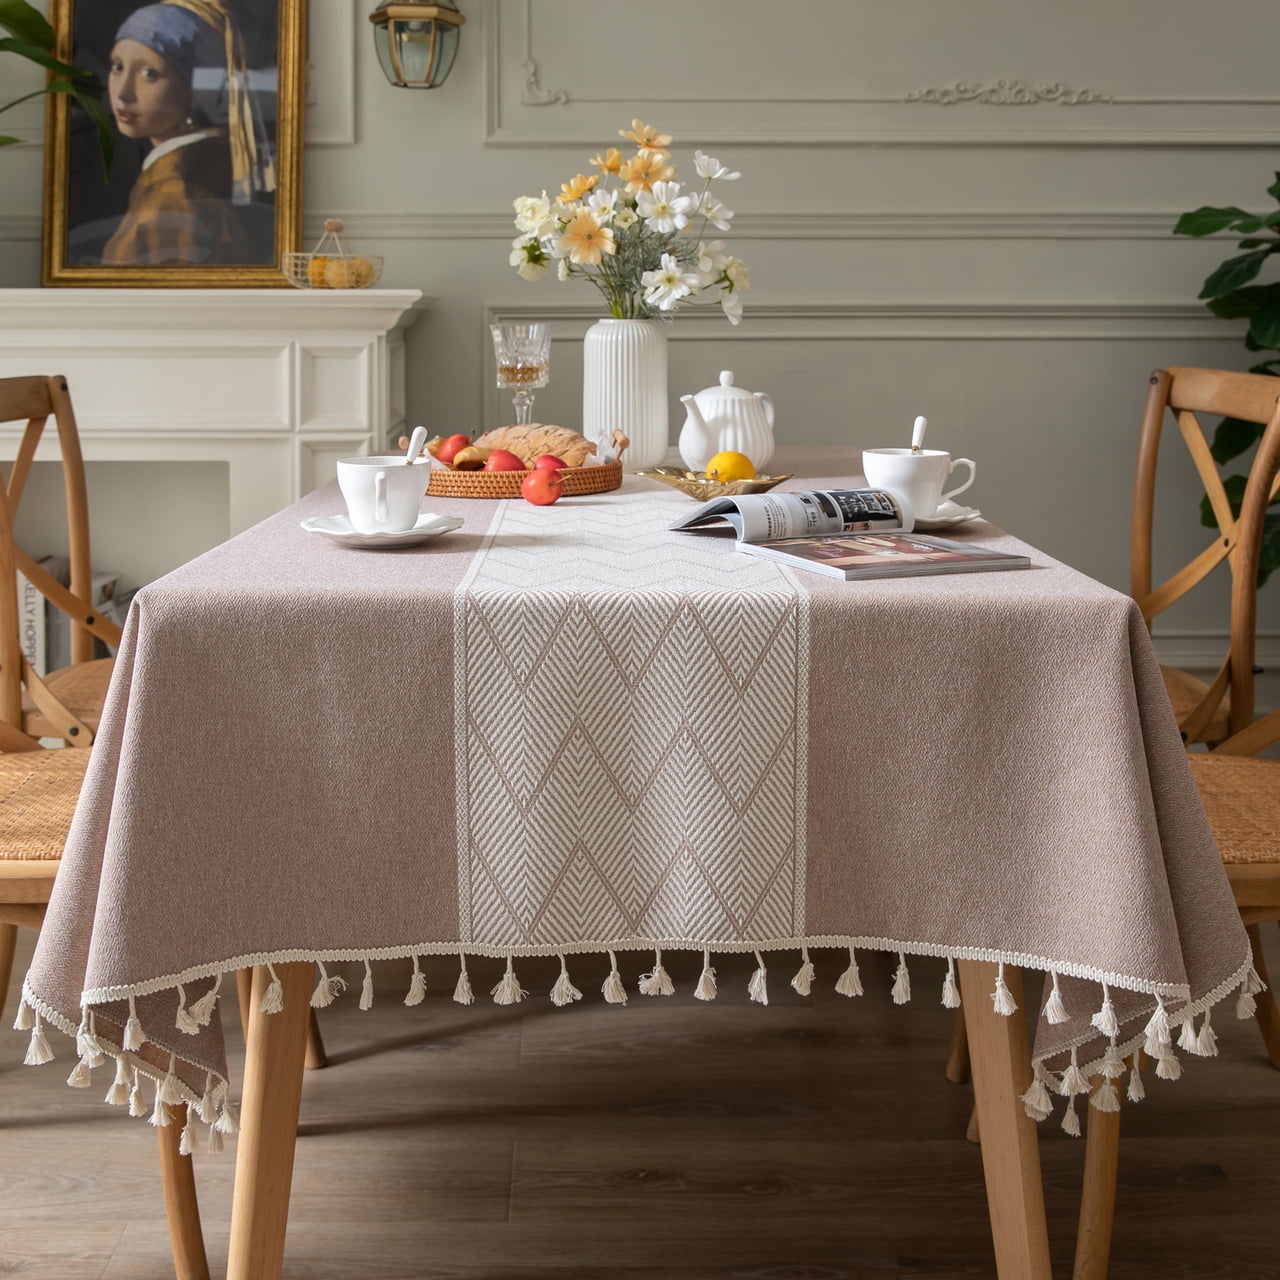 UK Cotton Linen Rectangle Tablecloth Striped Tassel Table Cloth Home Dust Cover 